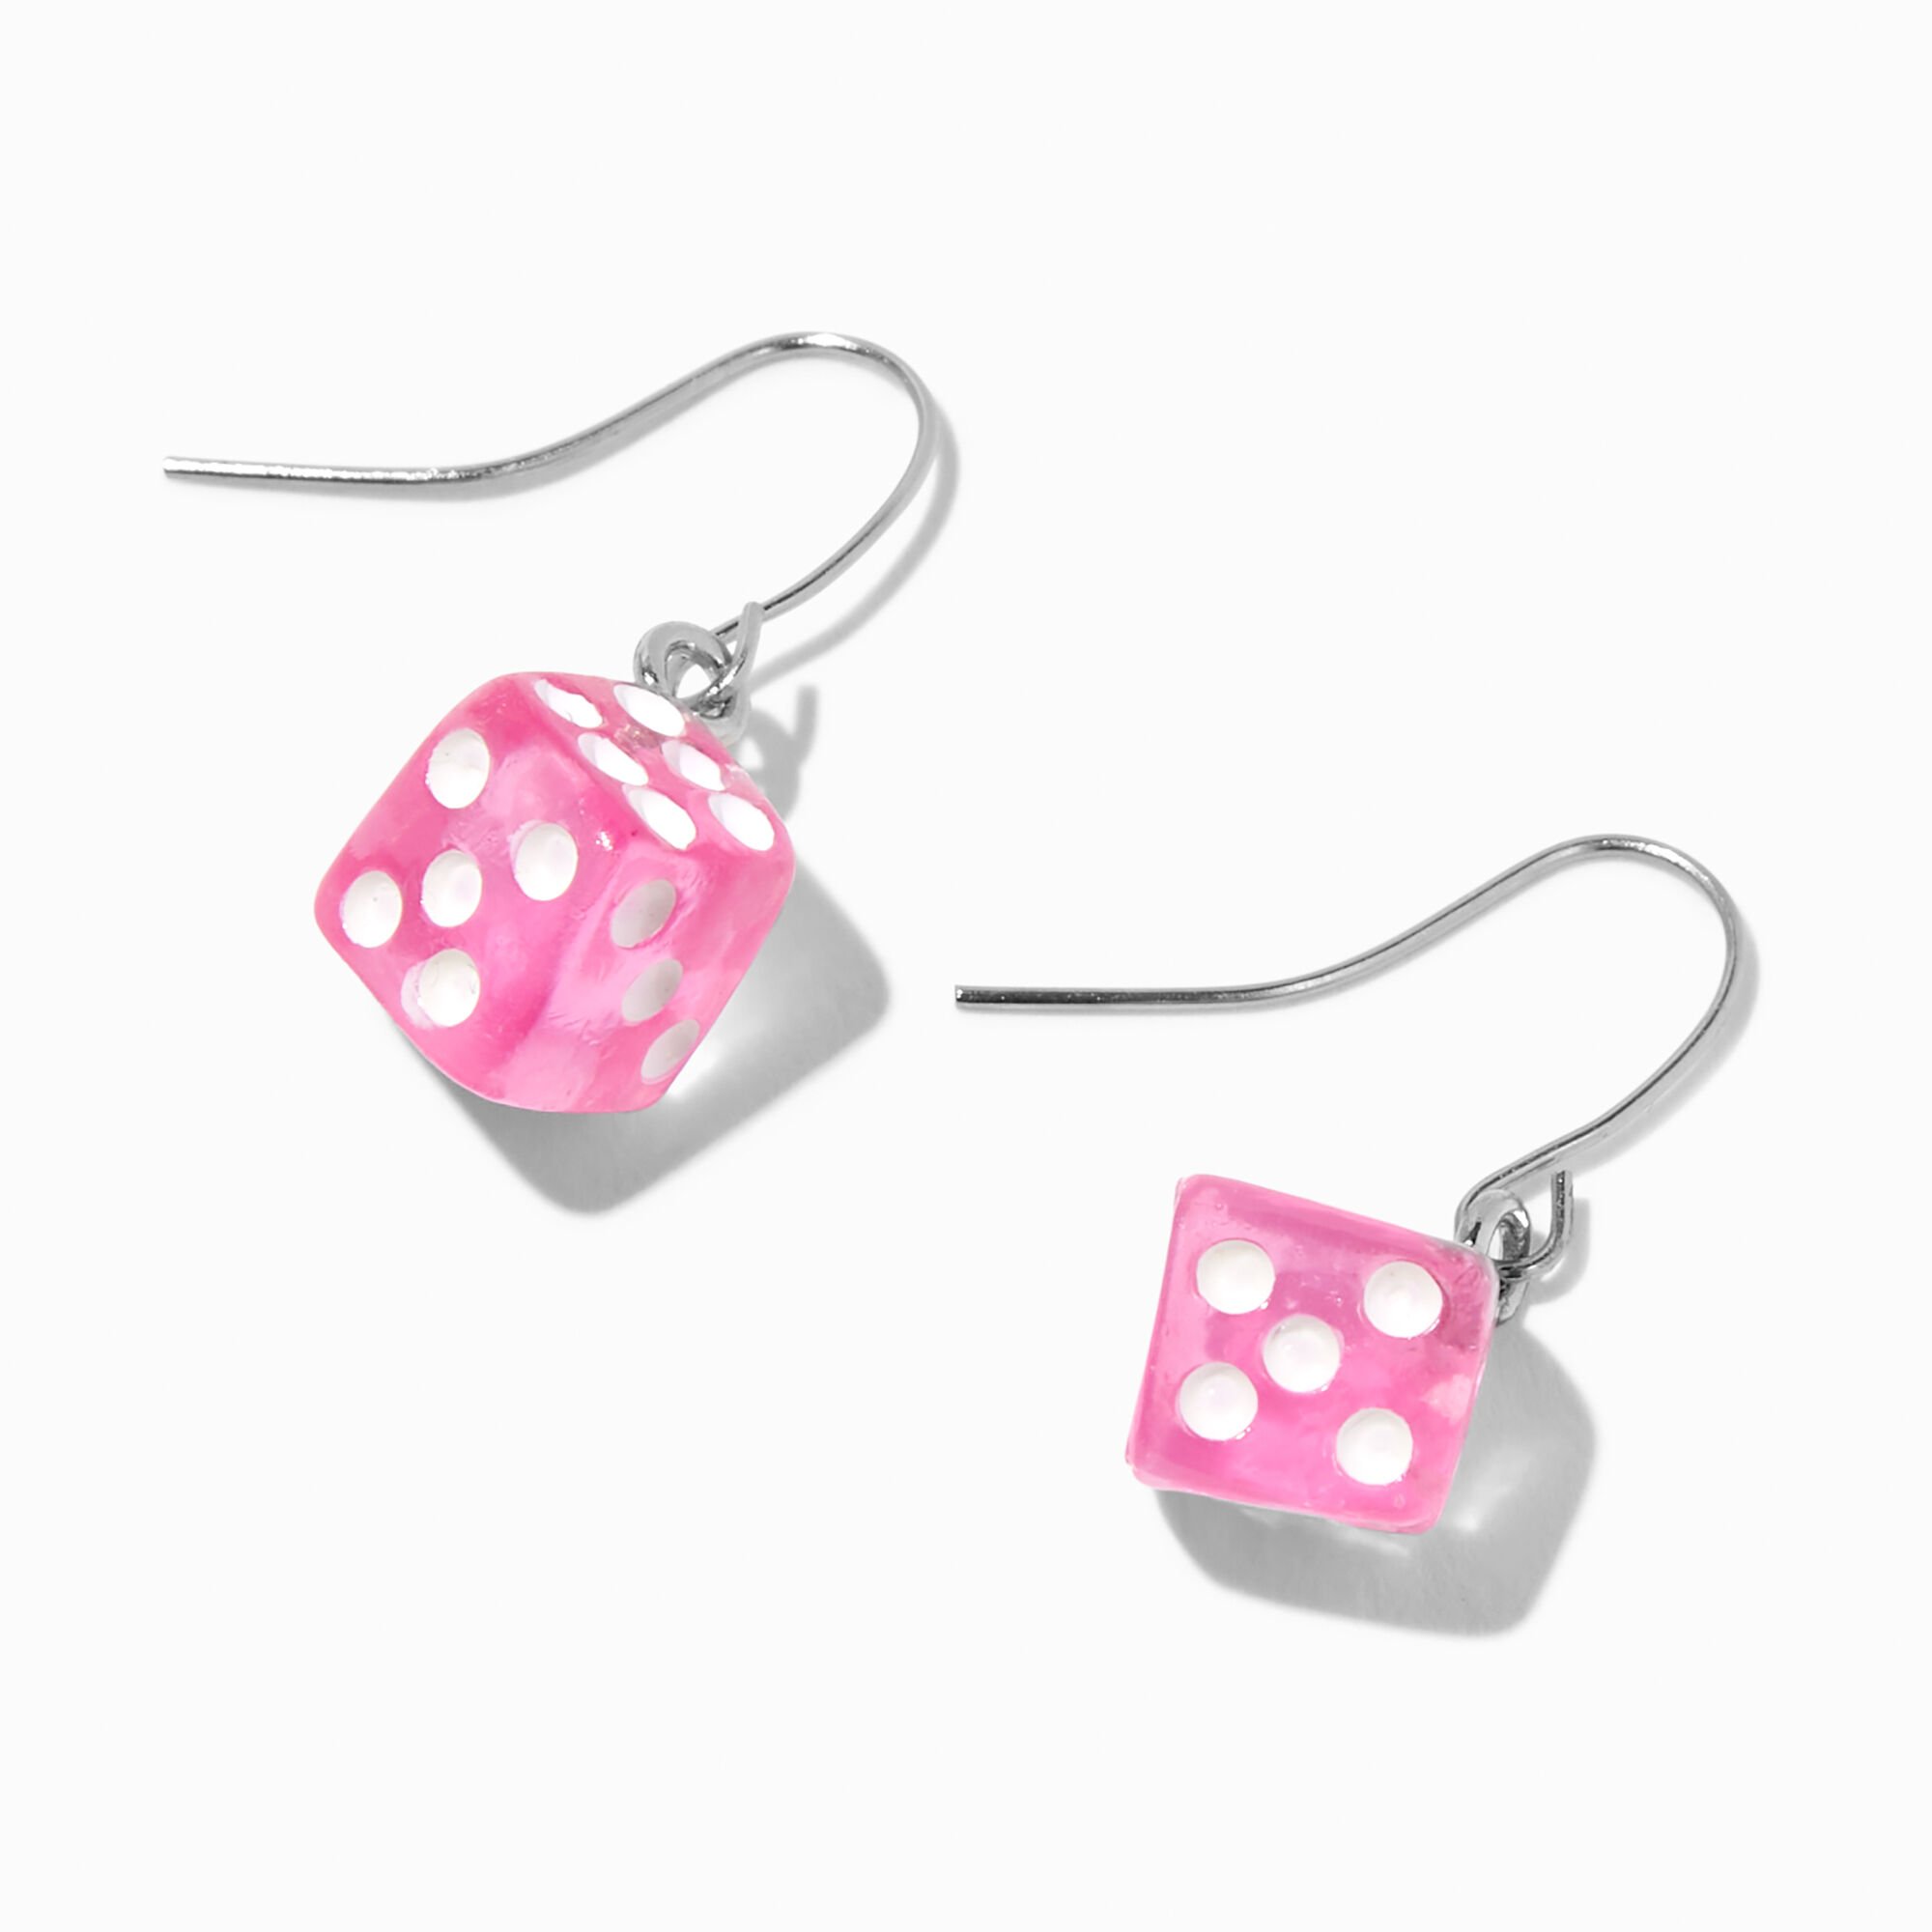 View Claires Pink 1 Dice Drop Earrings White information